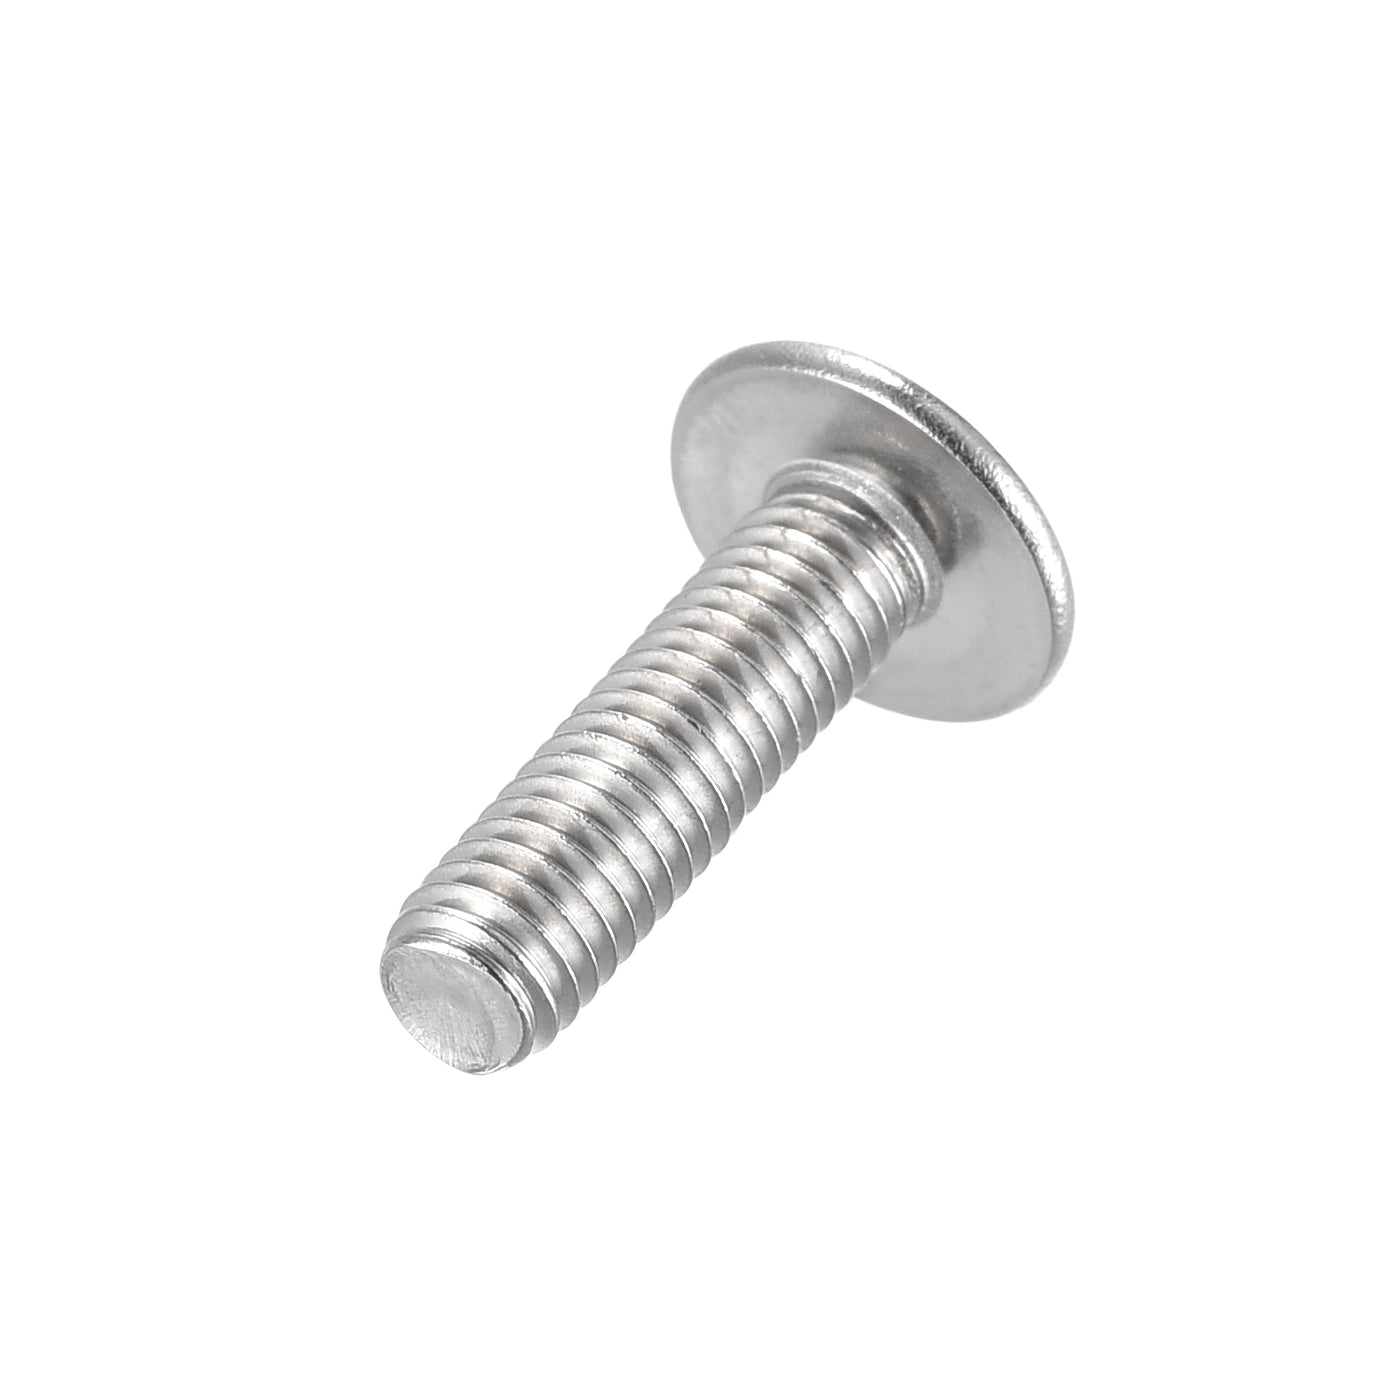 Uxcell Uxcell M4x18mm 304 Stainless Steel Flanged Button Head Socket Cap Screws 50pcs